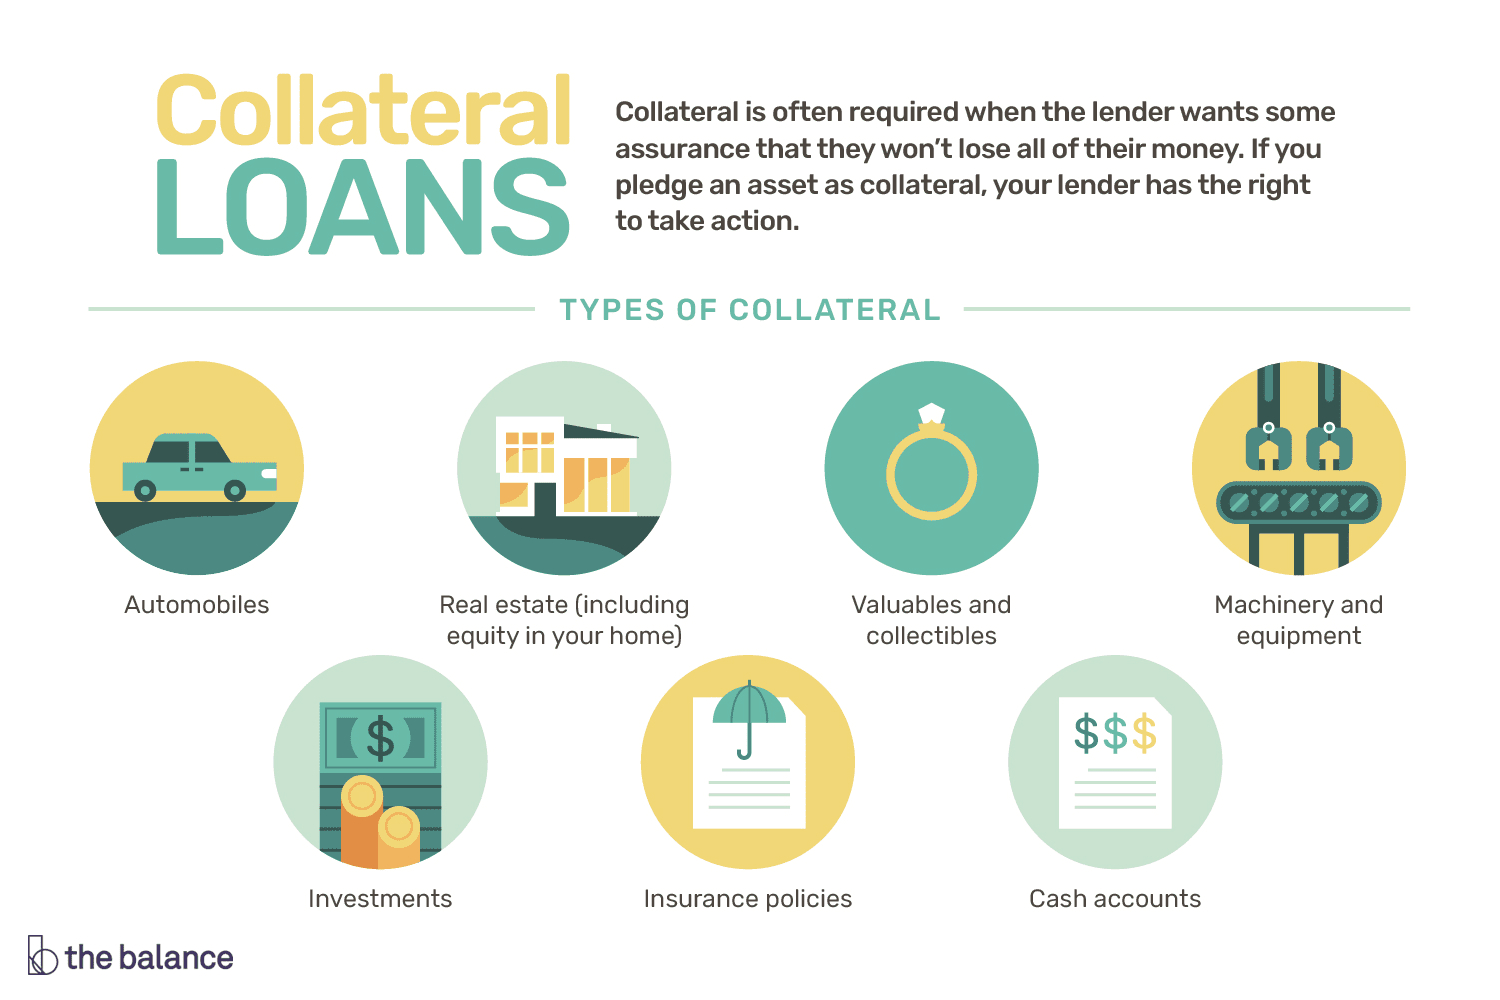 Collateral Management Agreement Definition Using Collateral Loans To Borrow Against Your Assets